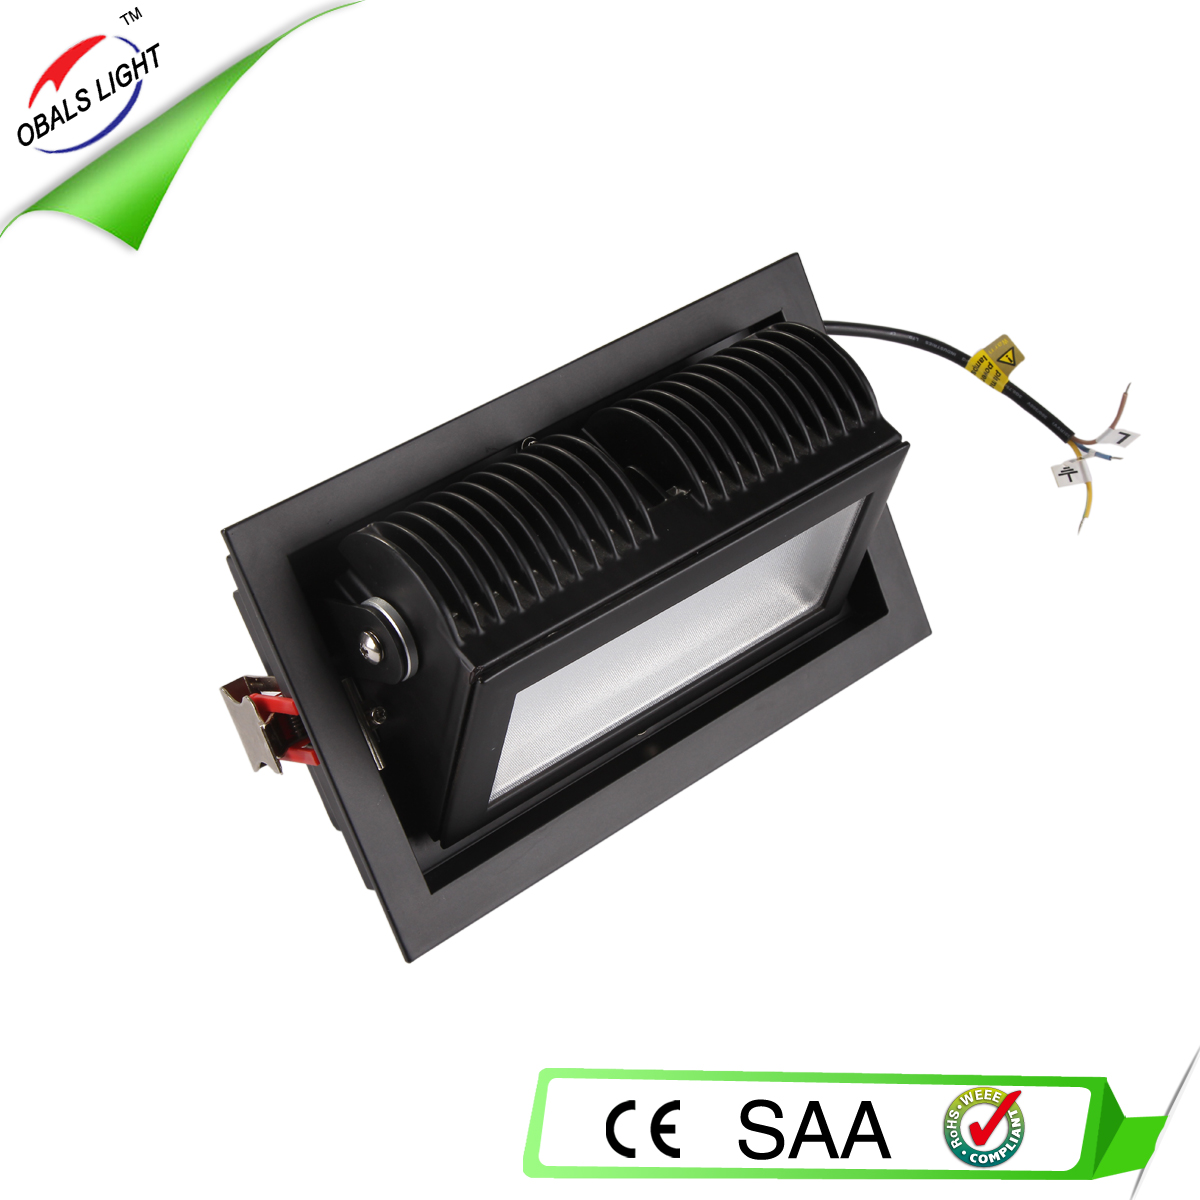 48W Adjustable recessed led spot downlight SMD CE ROHS SAA approved